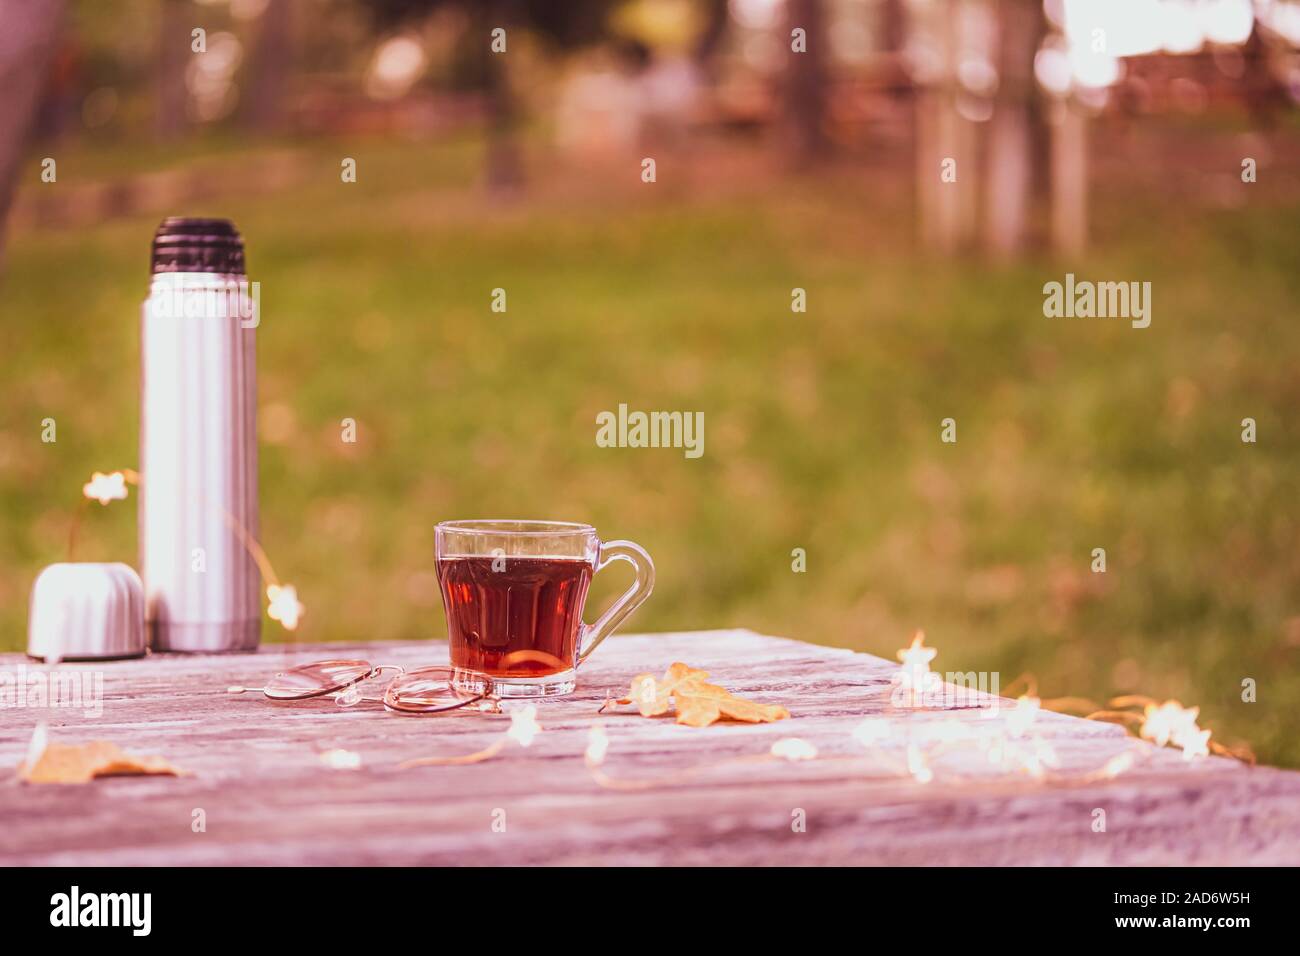 https://c8.alamy.com/comp/2AD6W5H/cozy-autumn-tea-break-with-a-cup-of-tea-thermos-flasksunglasses-and-dry-autumn-leaves-on-old-vintage-wooden-table-top-down-view-2AD6W5H.jpg